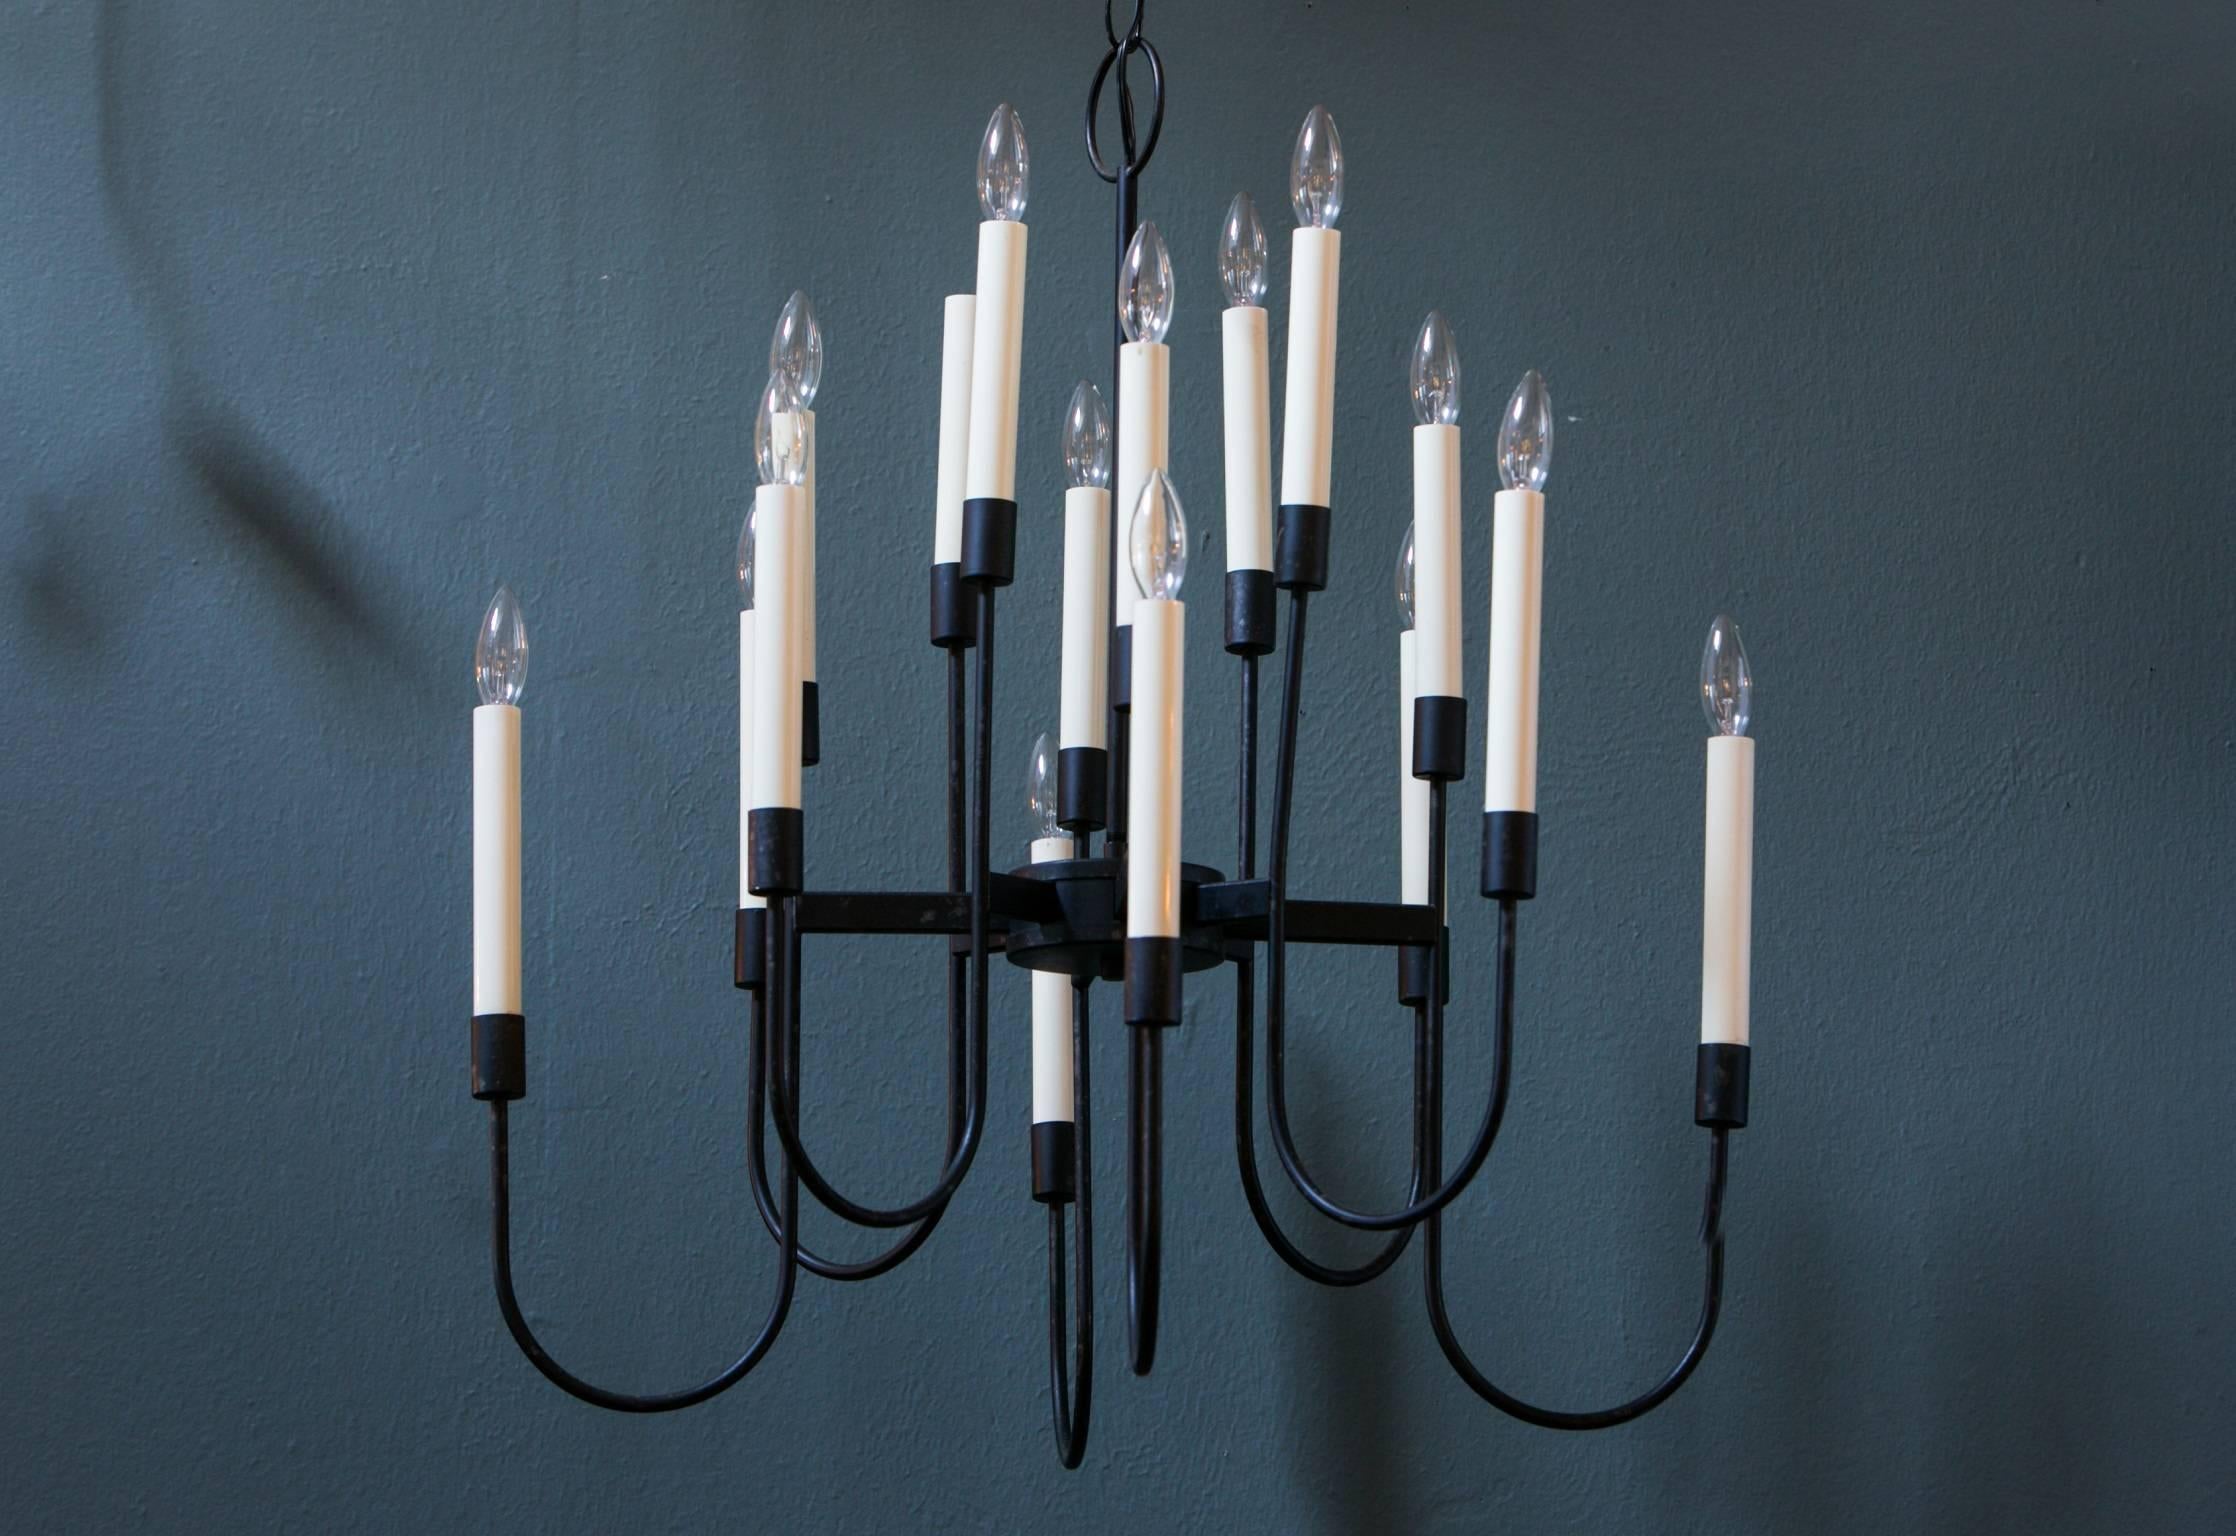 Black Mid-Century 16-arm chandelier by Lightolier. The design is often attributed to Tommi Parzinger. Newly rewired in the USA with all UL approved parts. Eight arms with two lights per arm. Uses chandelier socket bulbs, 60W maximum. Comes with